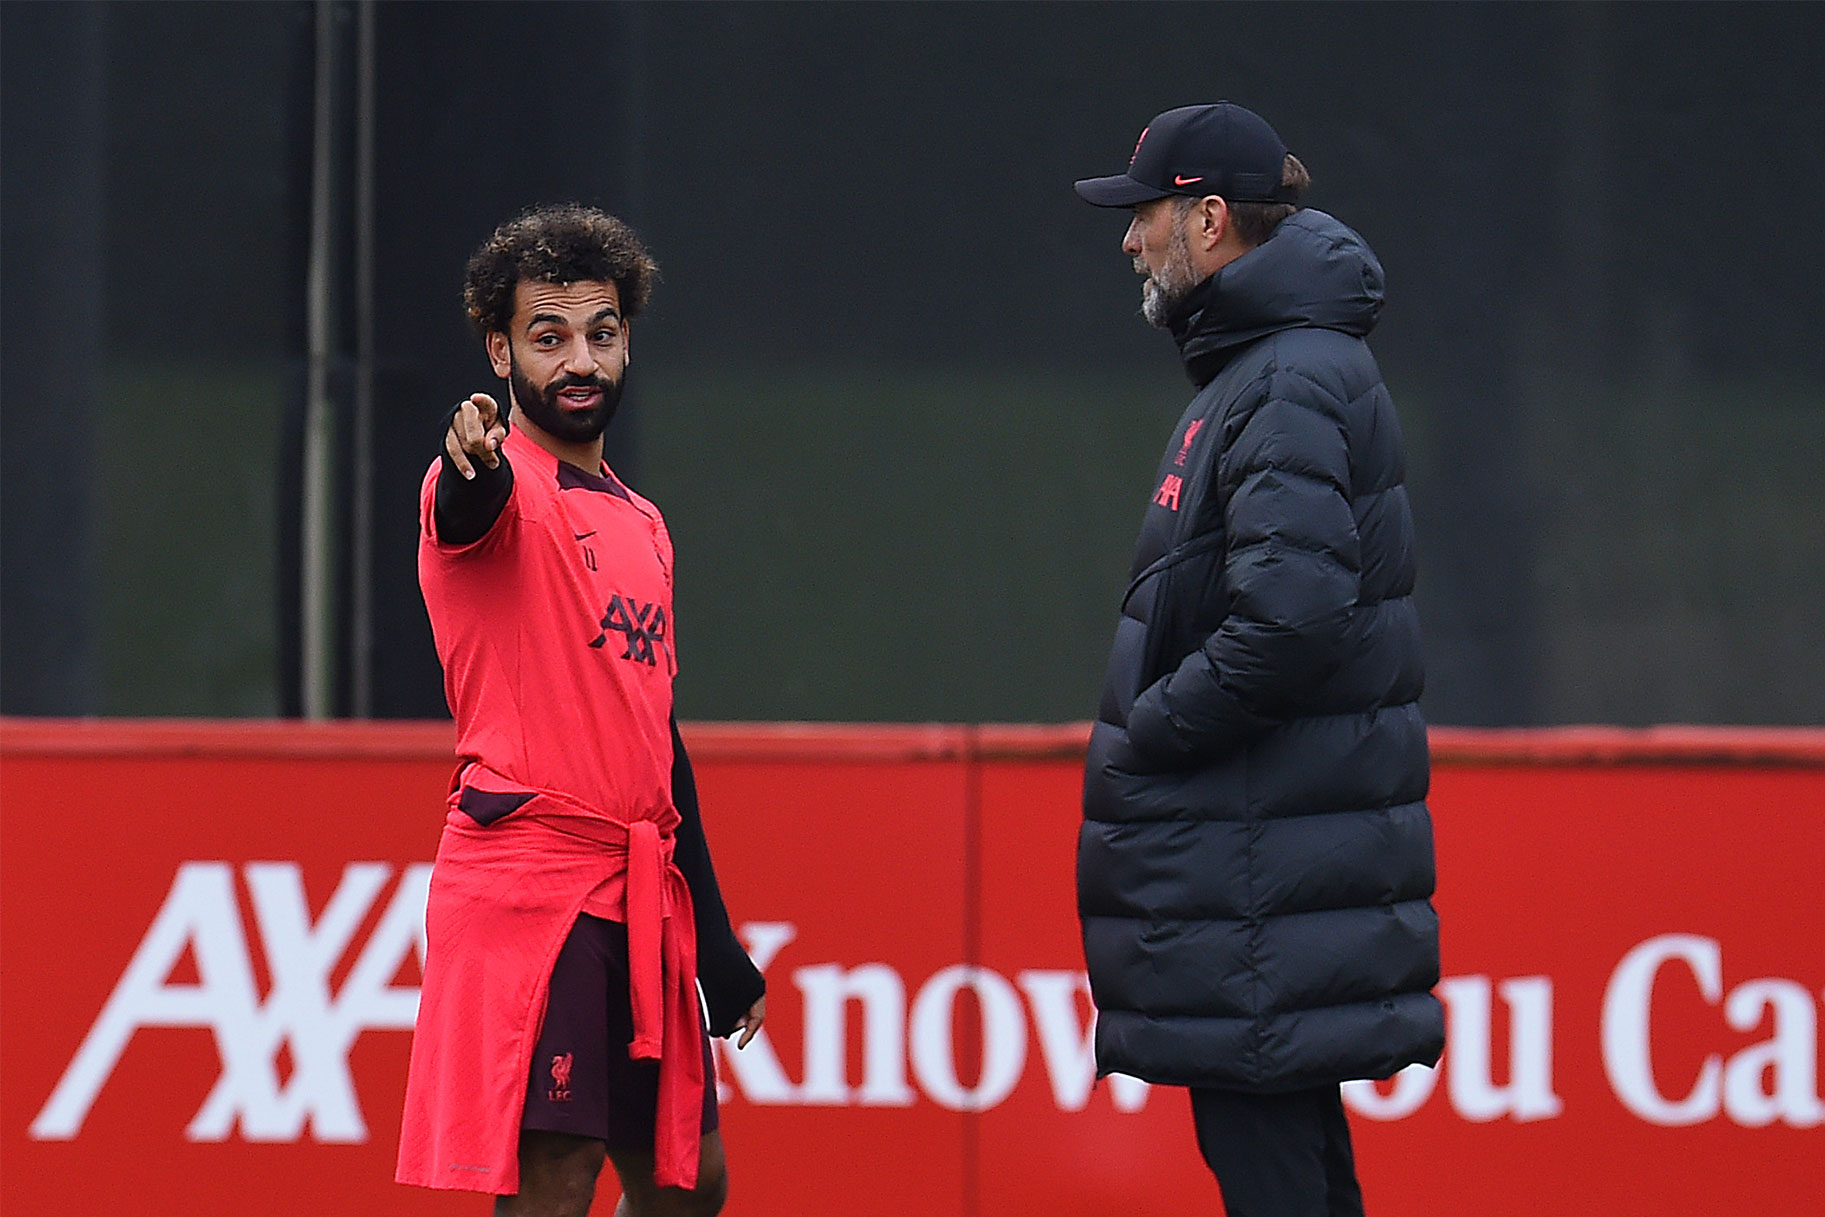 Jurgen Klopp manager of Liverpool chats with Mohamed Salah of Liverpool during a training session